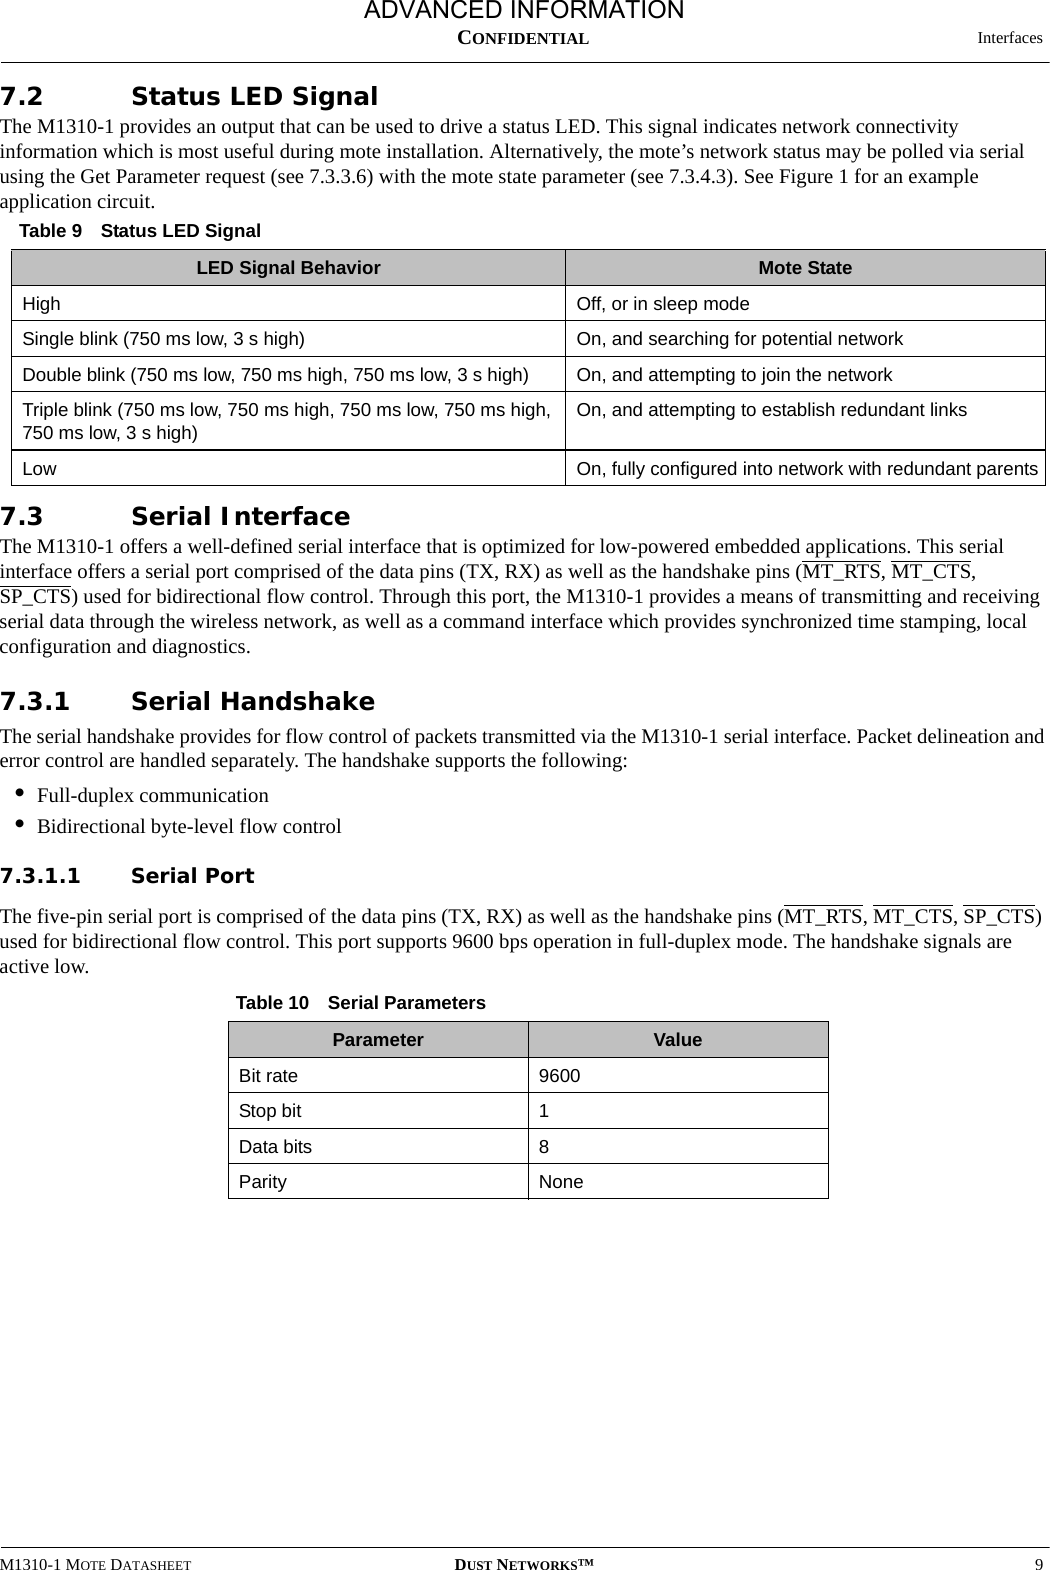  InterfacesM1310-1 MOTE DATASHEET DUST NETWORKS™9CONFIDENTIAL7.2 Status LED SignalThe M1310-1 provides an output that can be used to drive a status LED. This signal indicates network connectivity information which is most useful during mote installation. Alternatively, the mote’s network status may be polled via serial using the Get Parameter request (see 7.3.3.6) with the mote state parameter (see 7.3.4.3). See Figure 1 for an example application circuit. 7.3 Serial InterfaceThe M1310-1 offers a well-defined serial interface that is optimized for low-powered embedded applications. This serial interface offers a serial port comprised of the data pins (TX, RX) as well as the handshake pins (MT_RTS, MT_CTS, SP_CTS) used for bidirectional flow control. Through this port, the M1310-1 provides a means of transmitting and receiving serial data through the wireless network, as well as a command interface which provides synchronized time stamping, local configuration and diagnostics. 7.3.1 Serial HandshakeThe serial handshake provides for flow control of packets transmitted via the M1310-1 serial interface. Packet delineation and error control are handled separately. The handshake supports the following: •Full-duplex communication•Bidirectional byte-level flow control7.3.1.1 Serial PortThe five-pin serial port is comprised of the data pins (TX, RX) as well as the handshake pins (MT_RTS, MT_CTS, SP_CTS) used for bidirectional flow control. This port supports 9600 bps operation in full-duplex mode. The handshake signals are active low.Table 9 Status LED SignalLED Signal Behavior Mote StateHigh Off, or in sleep modeSingle blink (750 ms low, 3 s high) On, and searching for potential networkDouble blink (750 ms low, 750 ms high, 750 ms low, 3 s high) On, and attempting to join the networkTriple blink (750 ms low, 750 ms high, 750 ms low, 750 ms high,  750 ms low, 3 s high)On, and attempting to establish redundant linksLow On, fully configured into network with redundant parentsTable 10 Serial ParametersParameter ValueBit rate 9600 Stop bit 1Data bits 8Parity NoneADVANCED INFORMATION